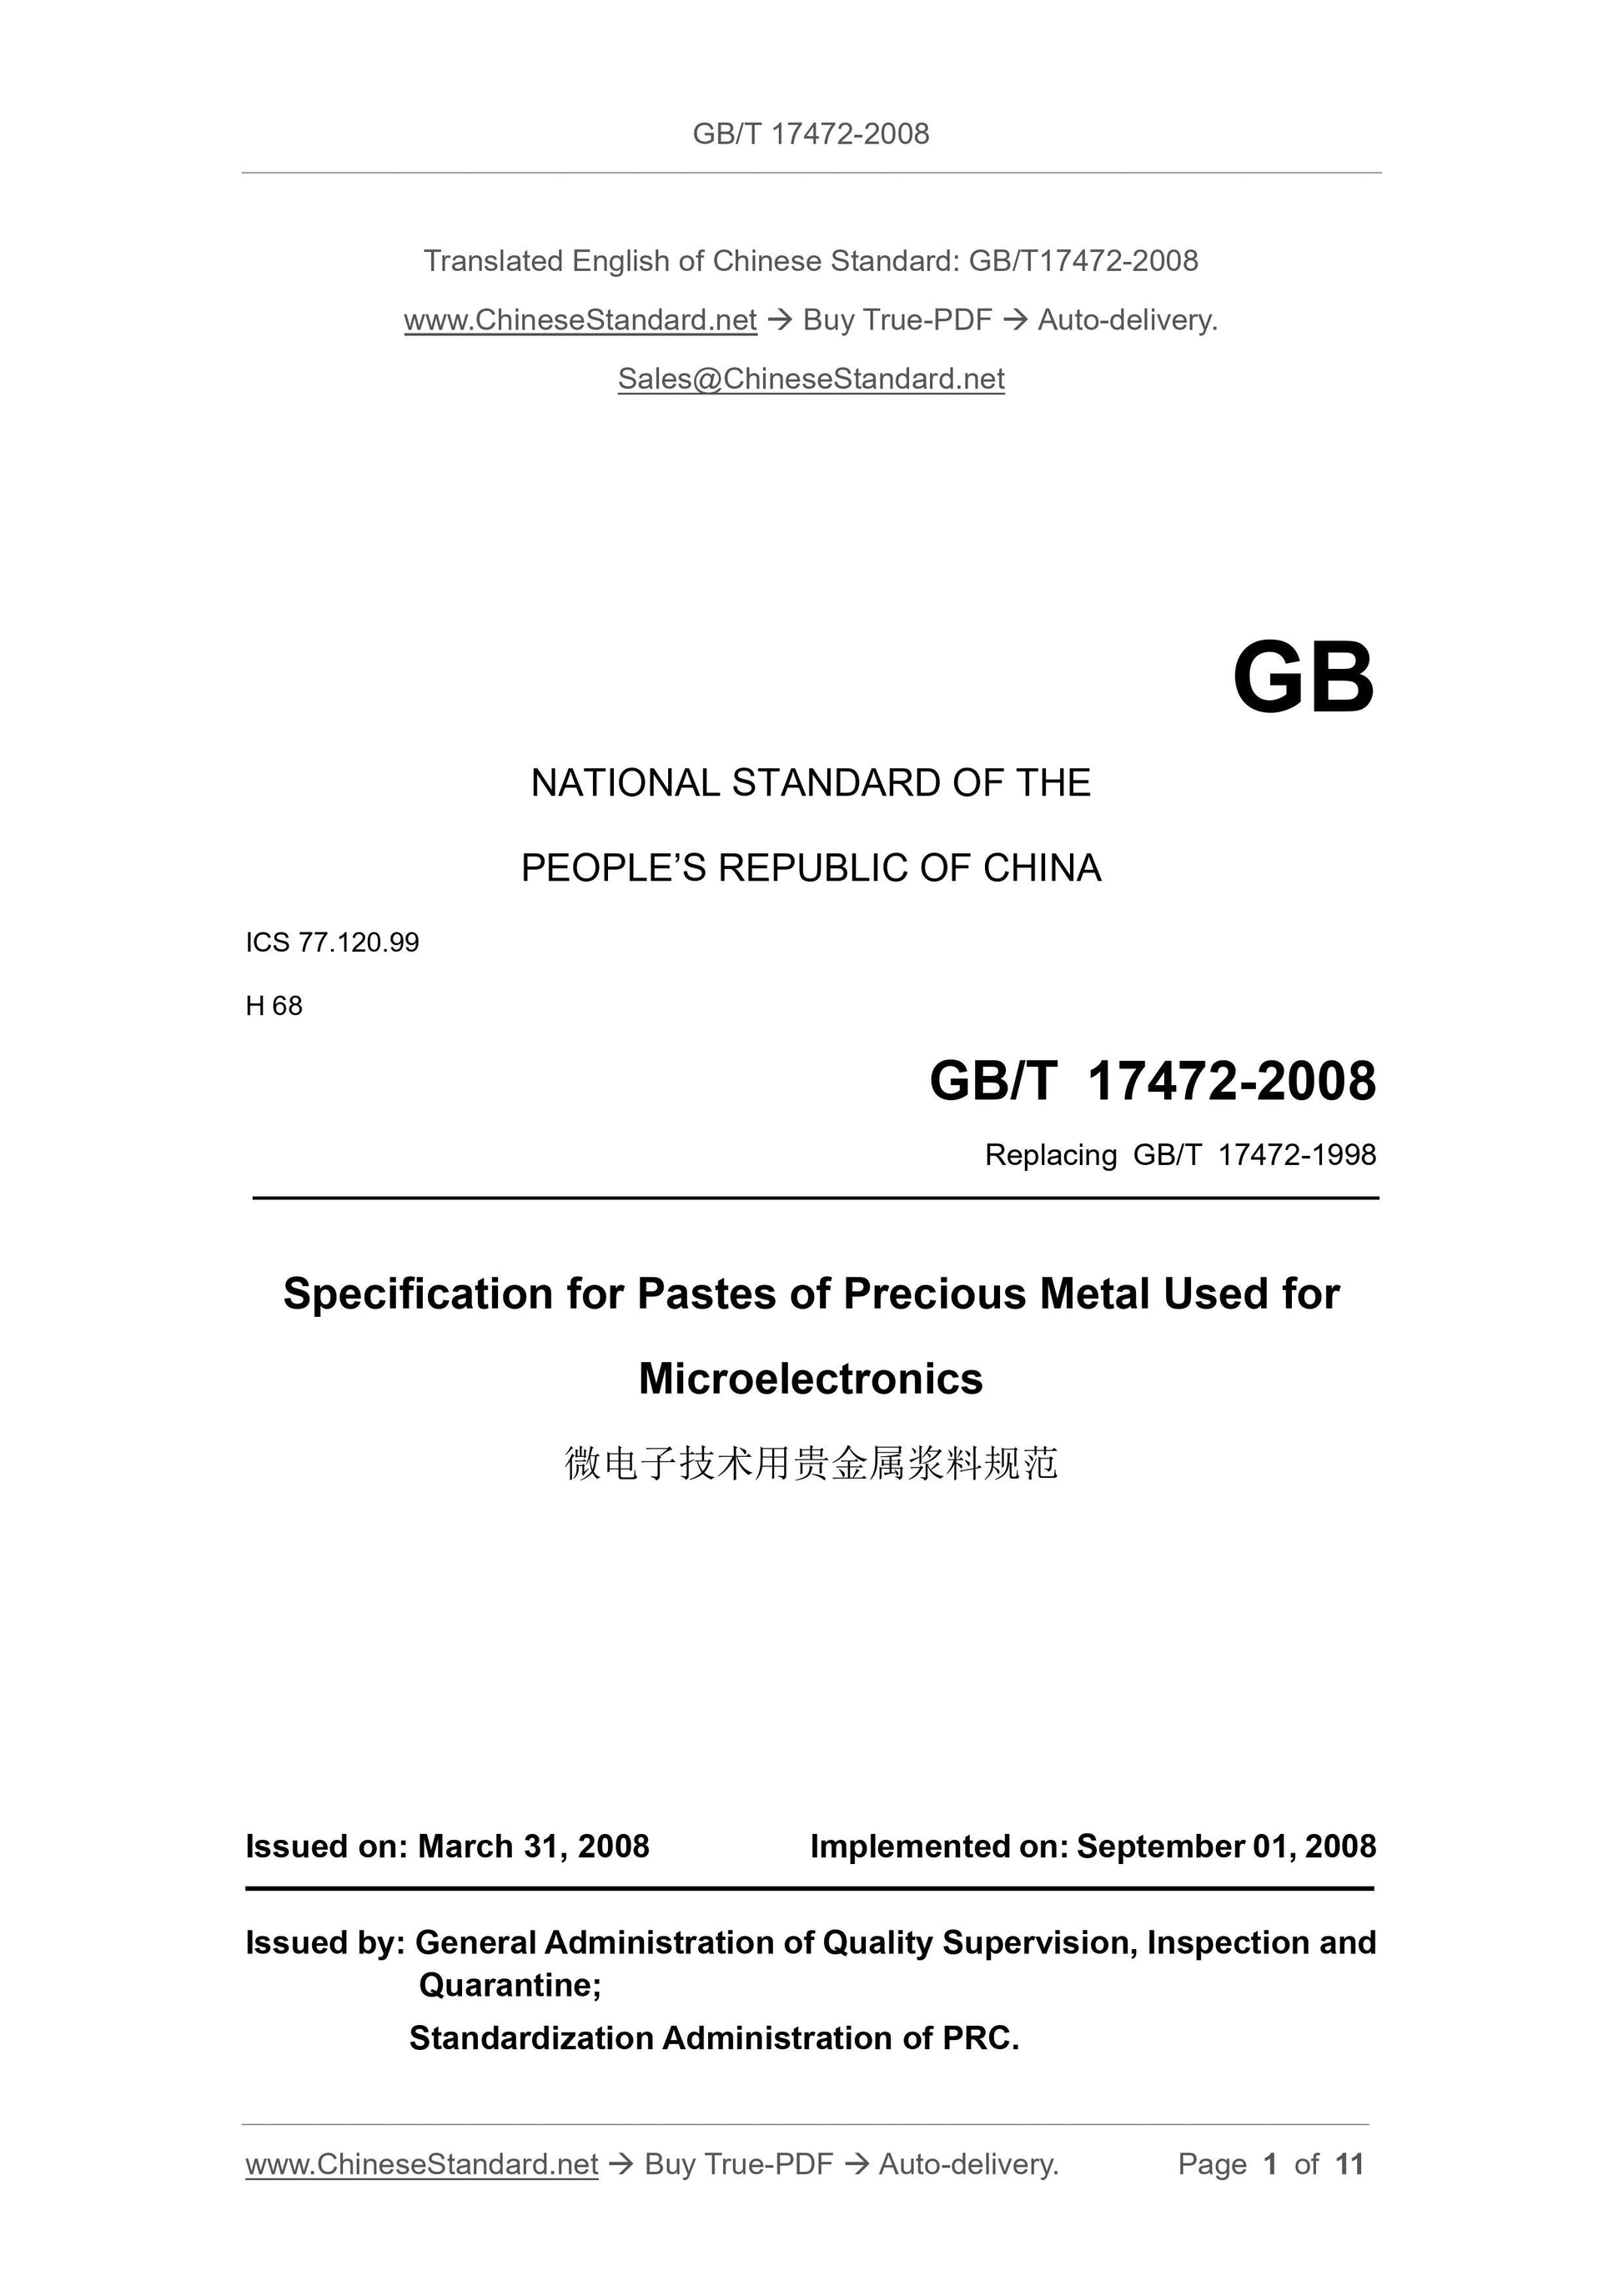 GB/T 17472-2008 Page 1